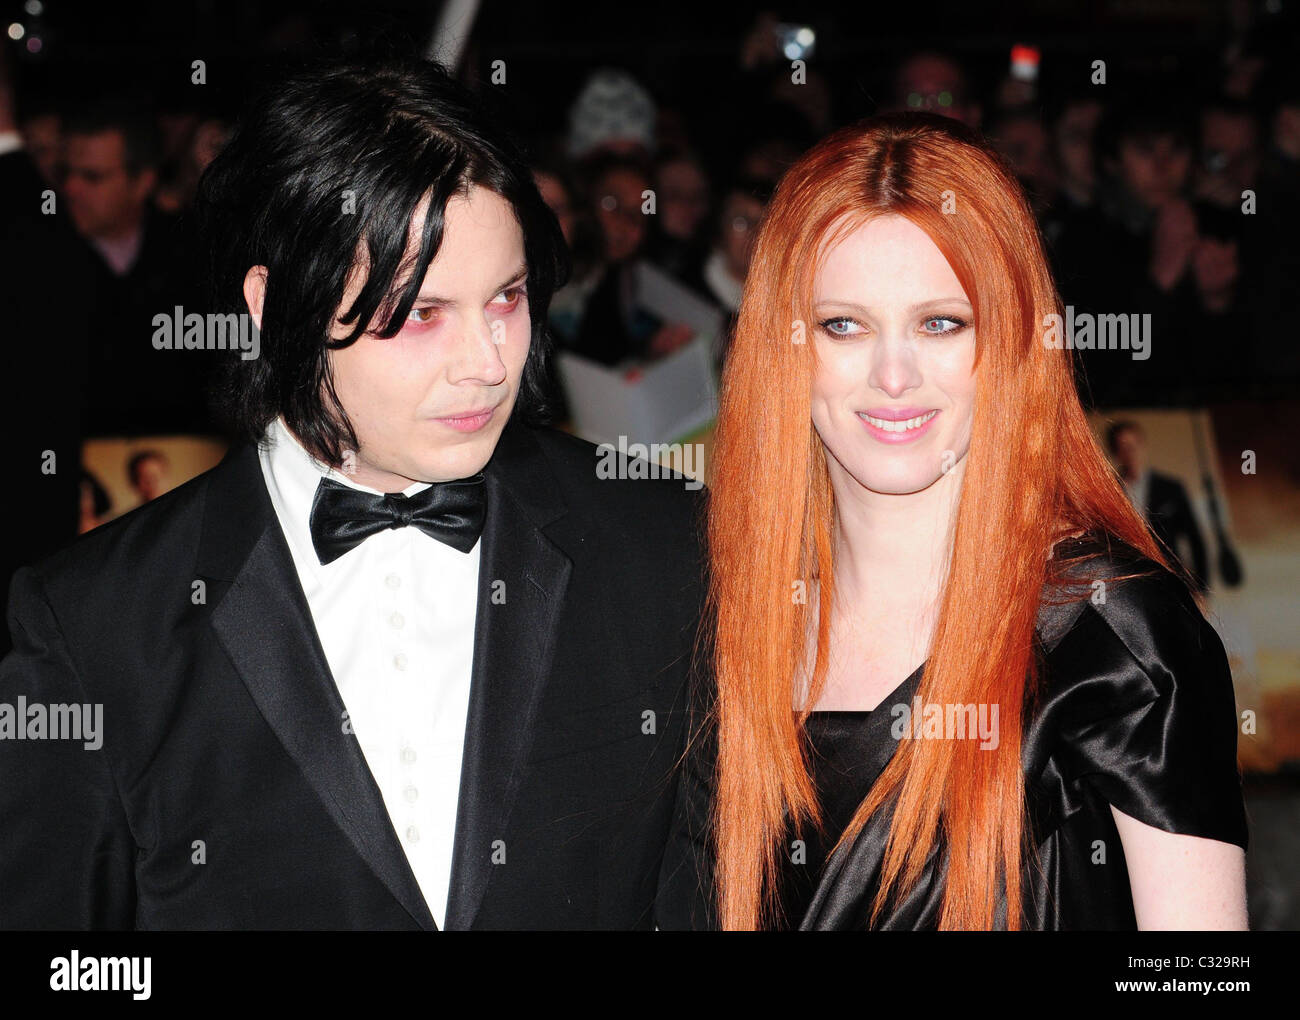 Jack White and Karen Elson The World premiere of the new James Bond movie 'Quantum of Solace' held at the Odeon Cinema, Stock Photo